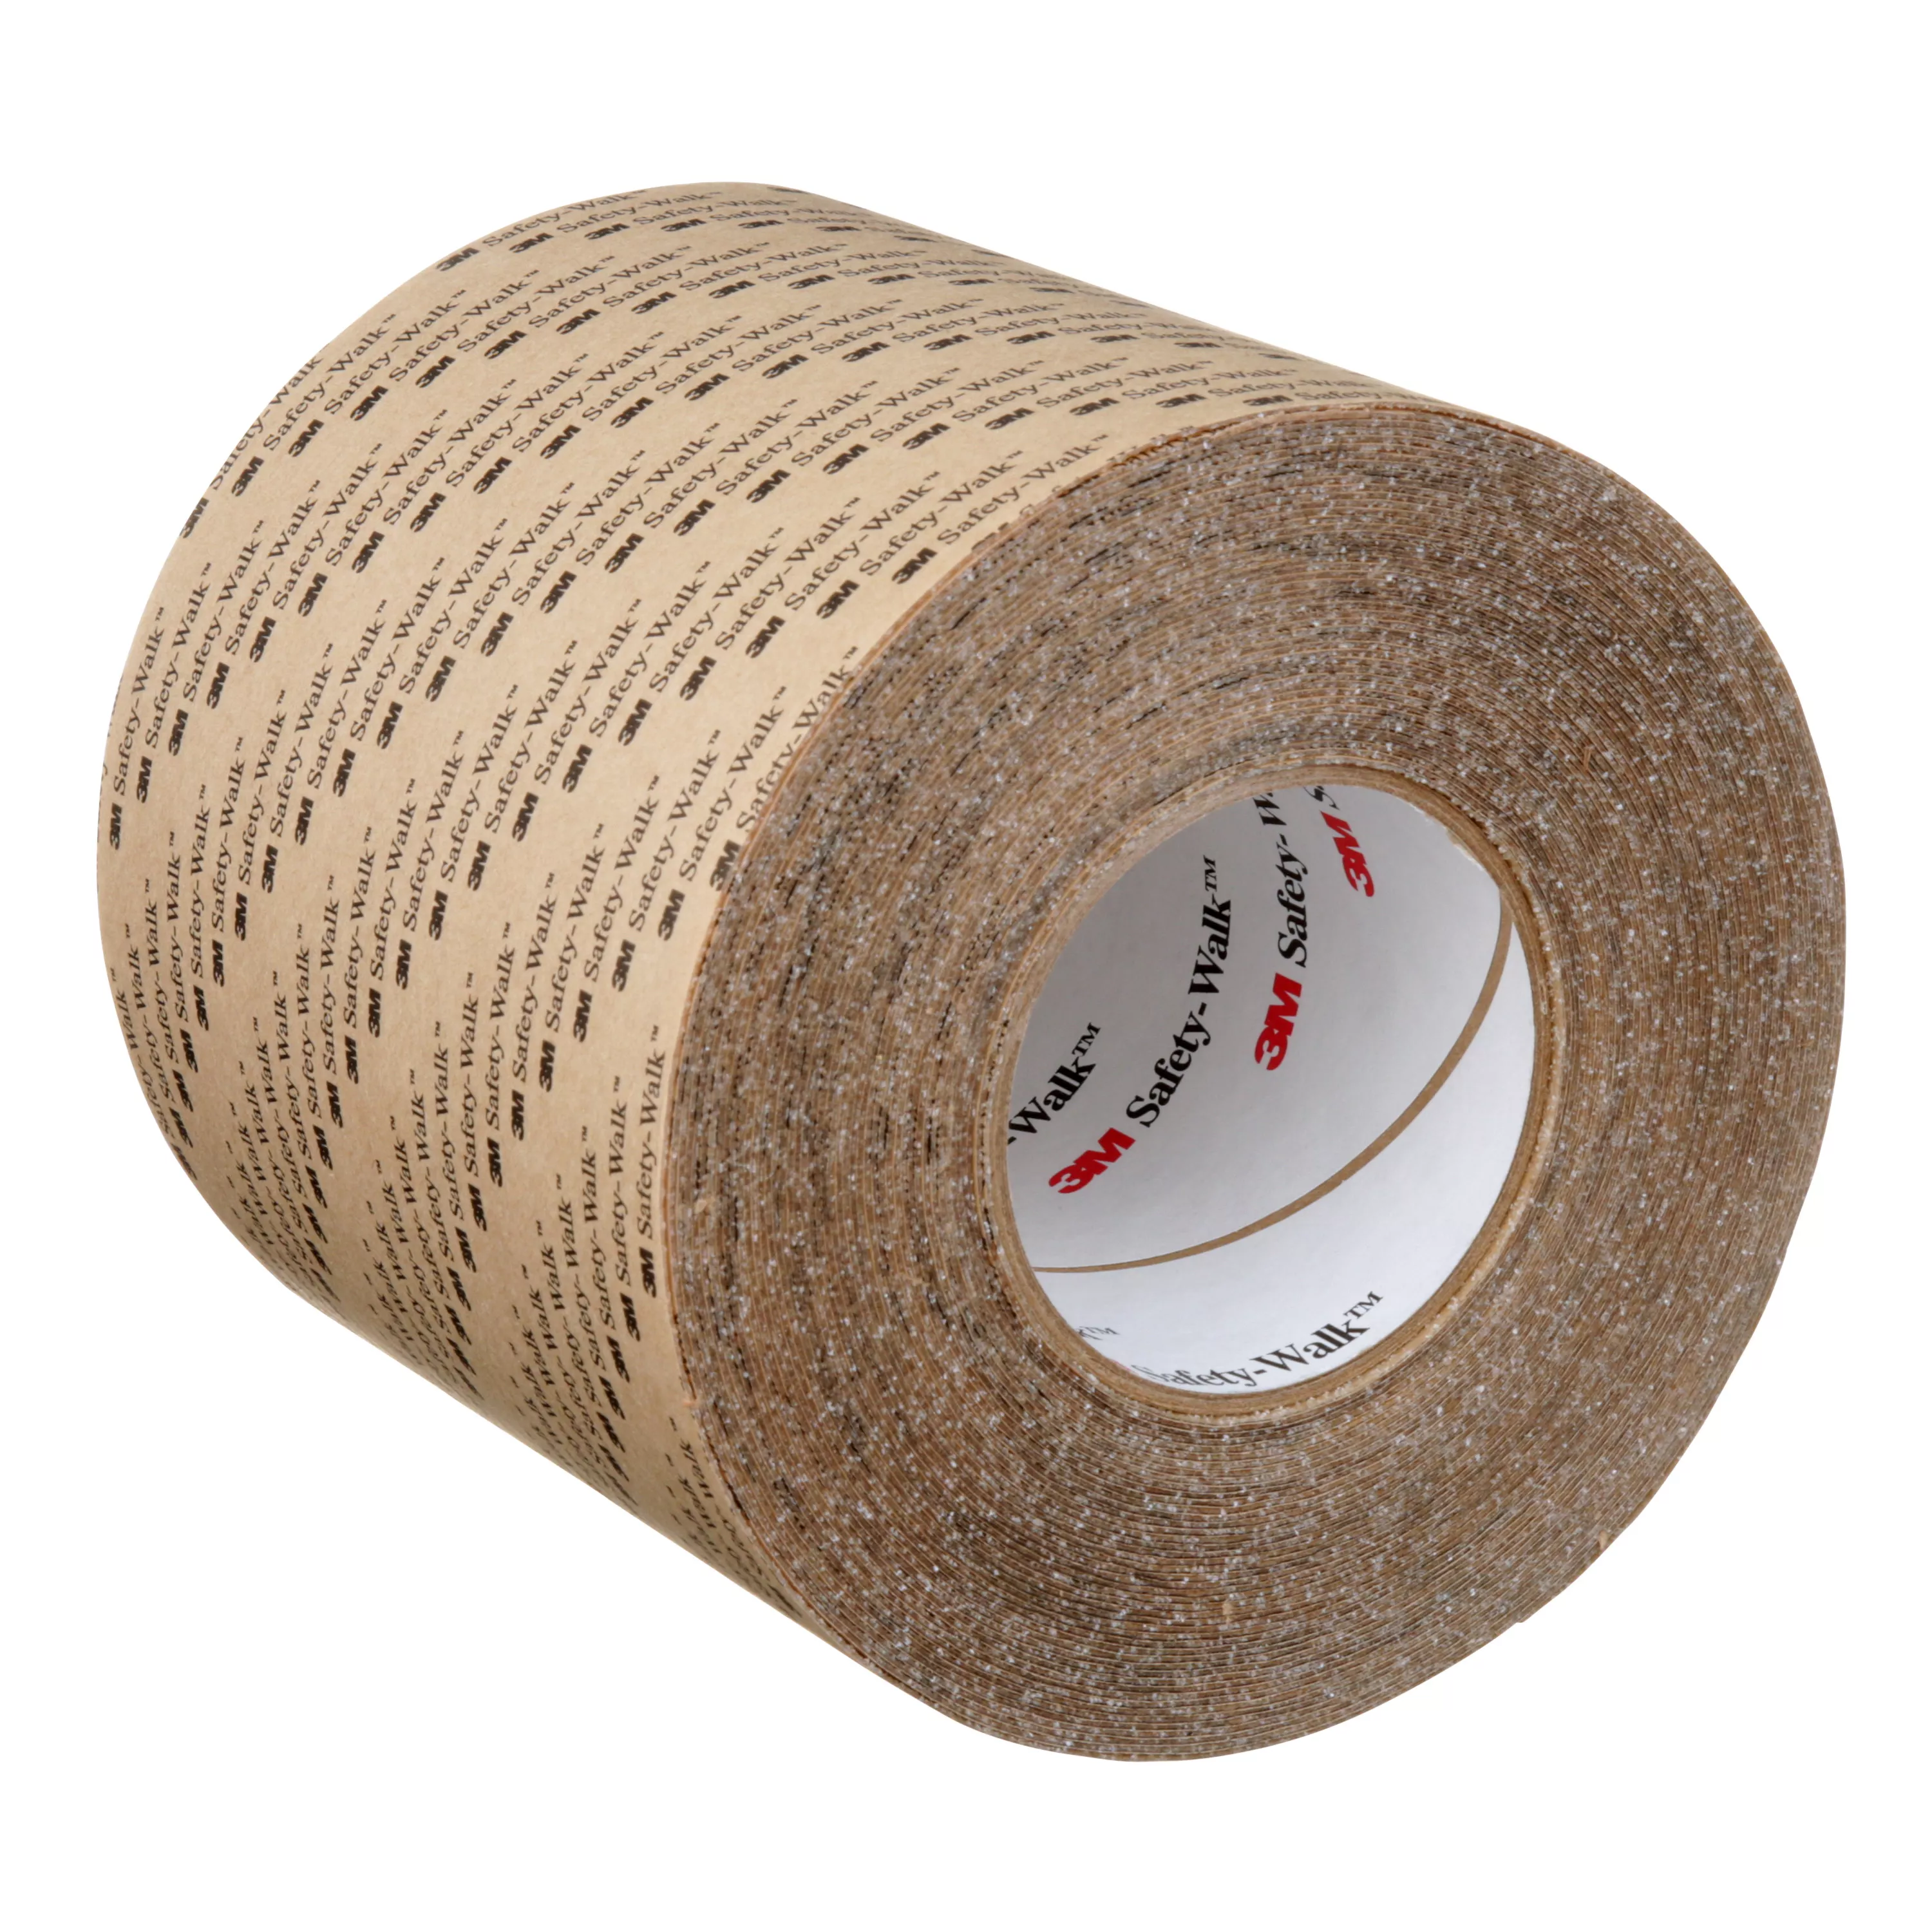 3M™ Safety-Walk™ Slip-Resistant General Purpose Tapes & Treads 620,
Clear, 6 in x 60 ft, Roll, 1/Case